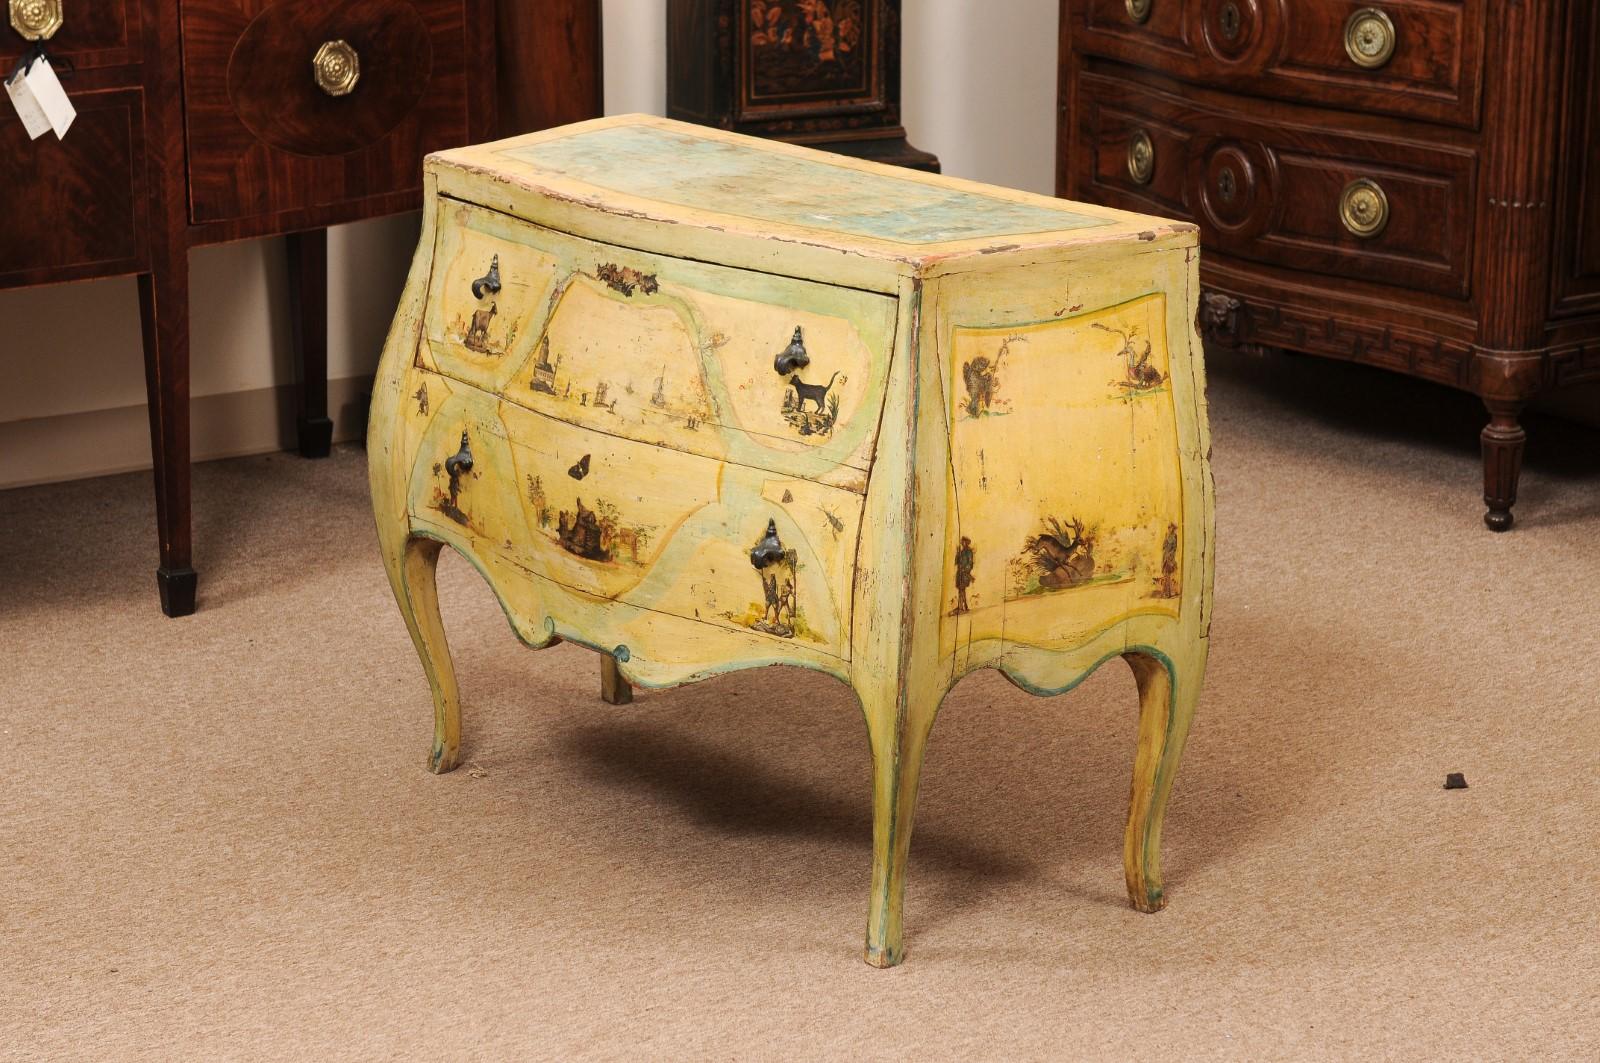  18th Century Italian Venetian Painted Yellow Commode with Decoupage Decoration  For Sale 6